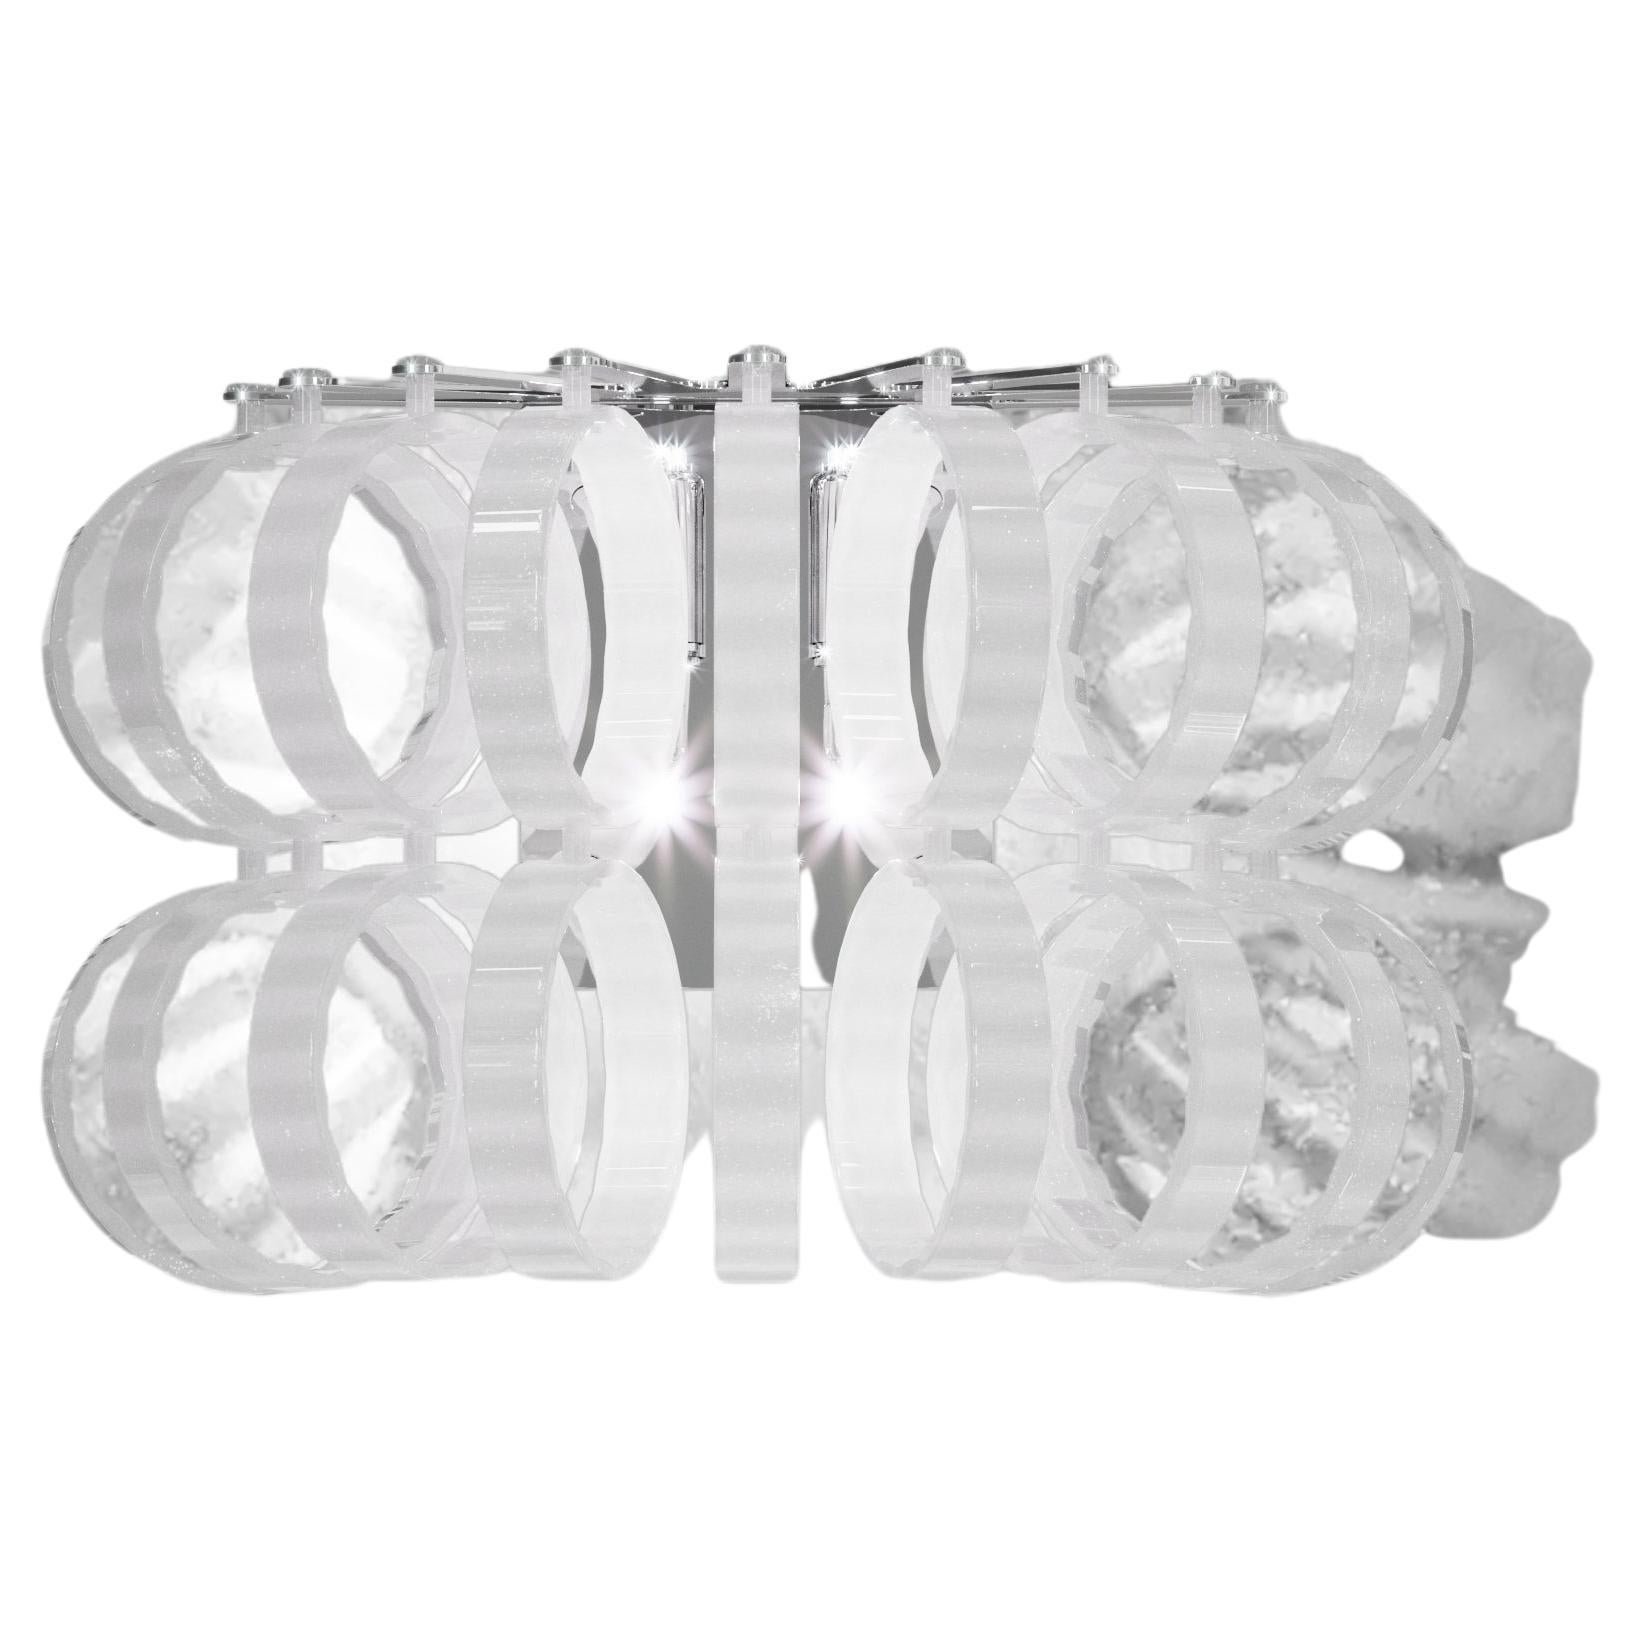 Vistosi Ecos Wall Sconce in White Striped Glass with Glossy Chrome Frame